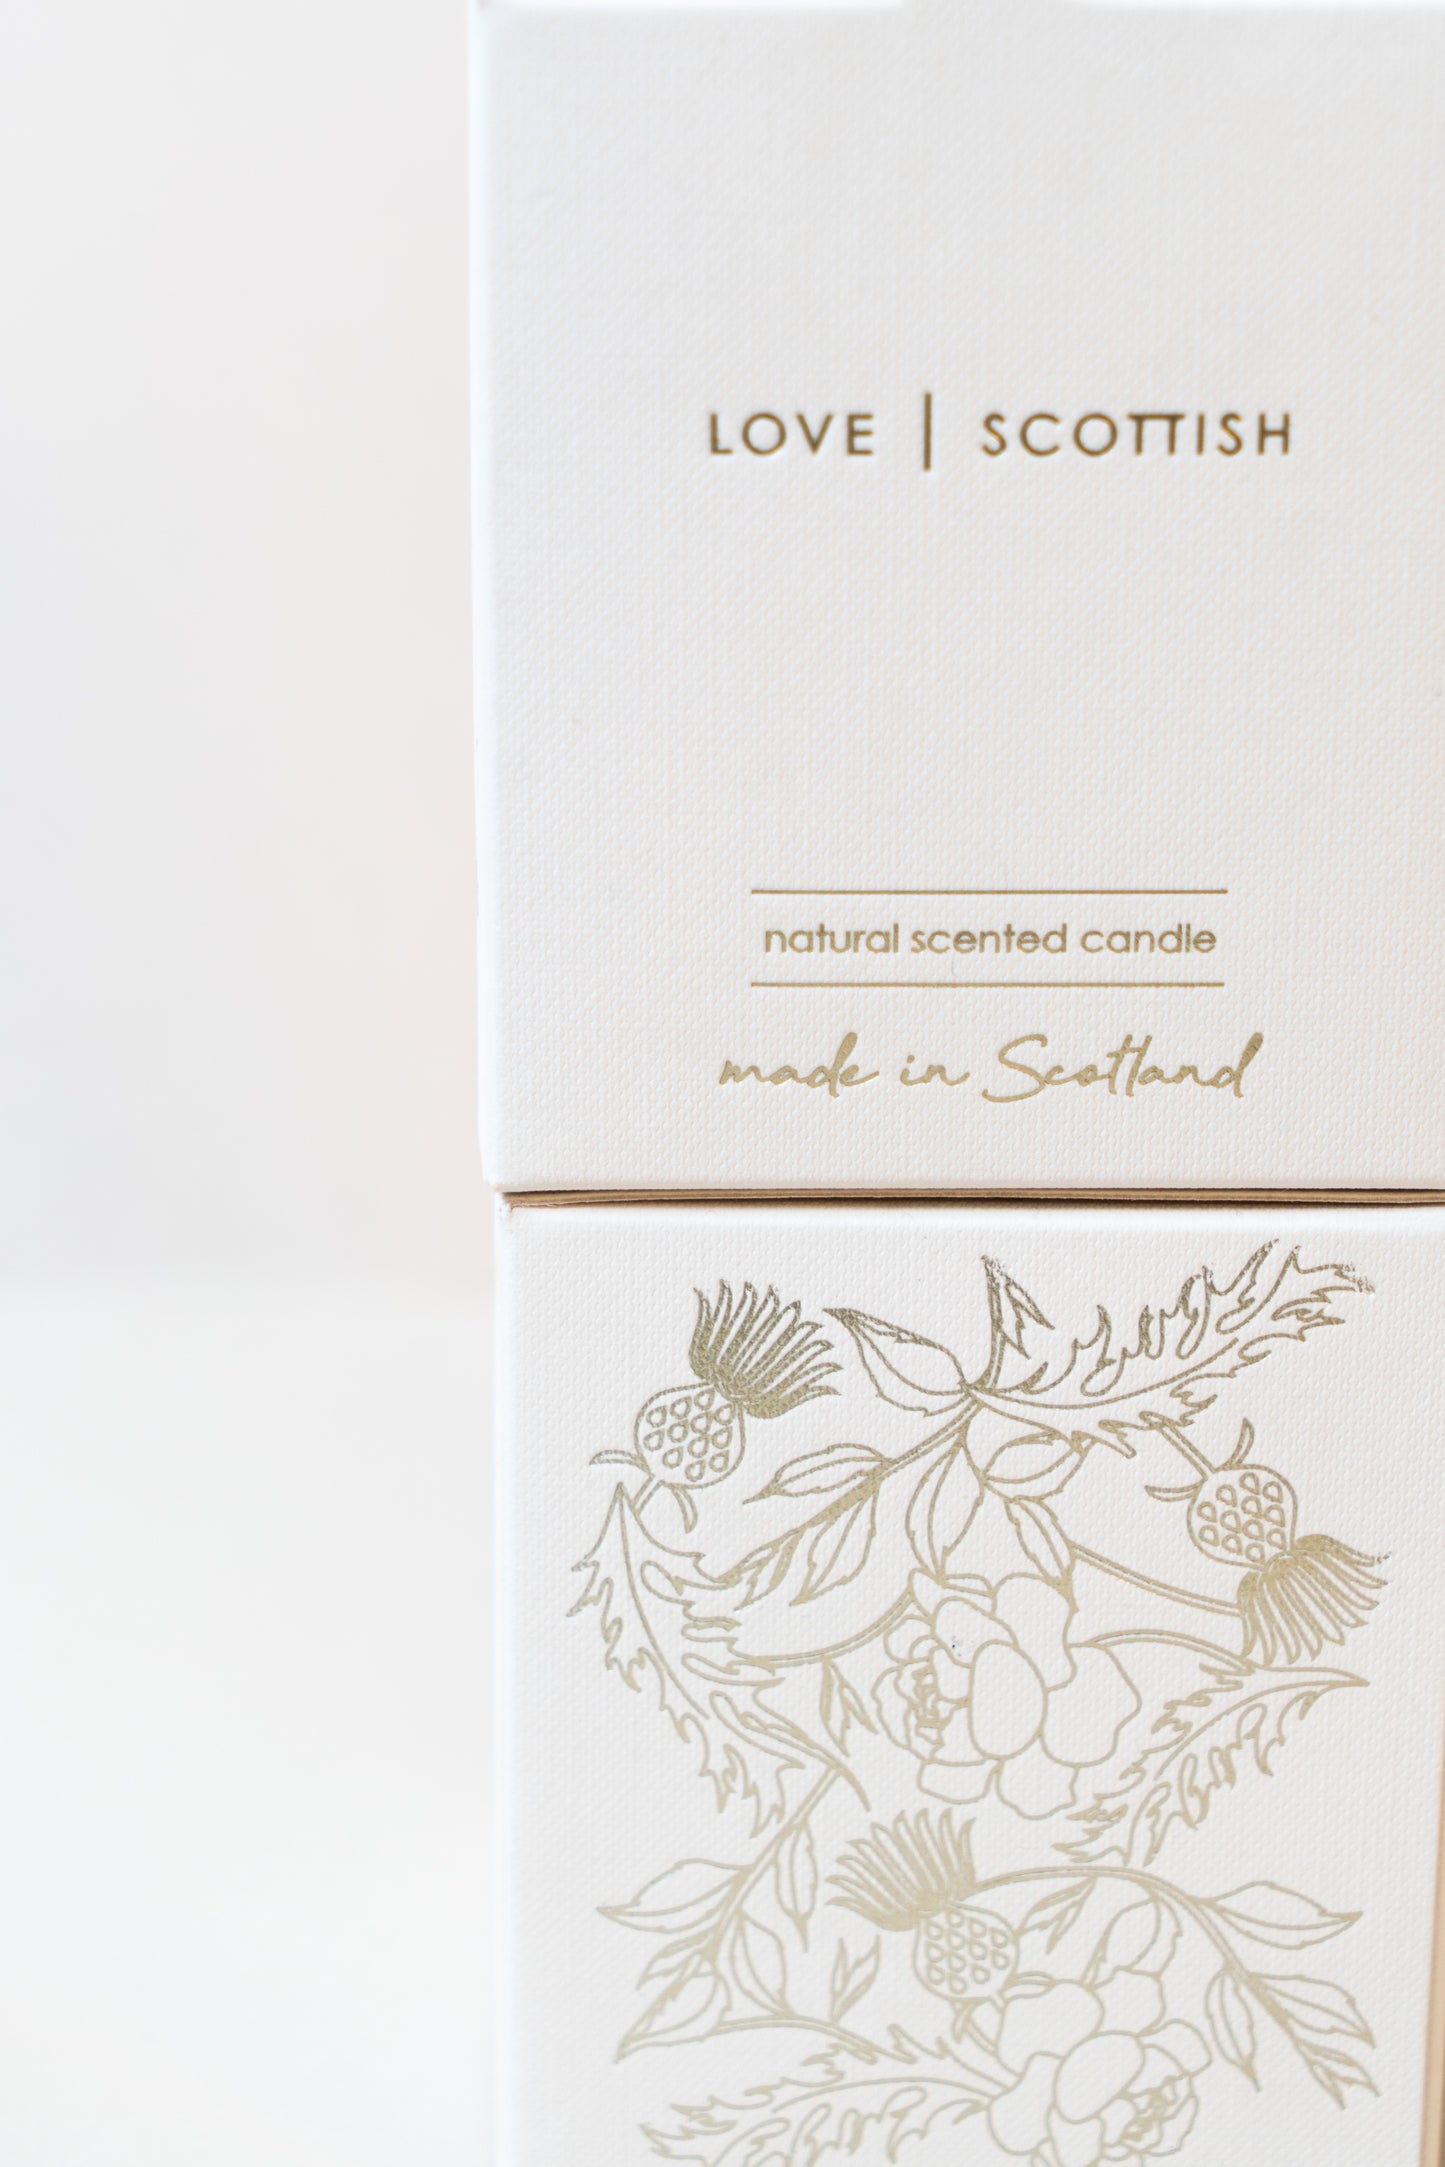 Love Scottish Candle boxes on a white background